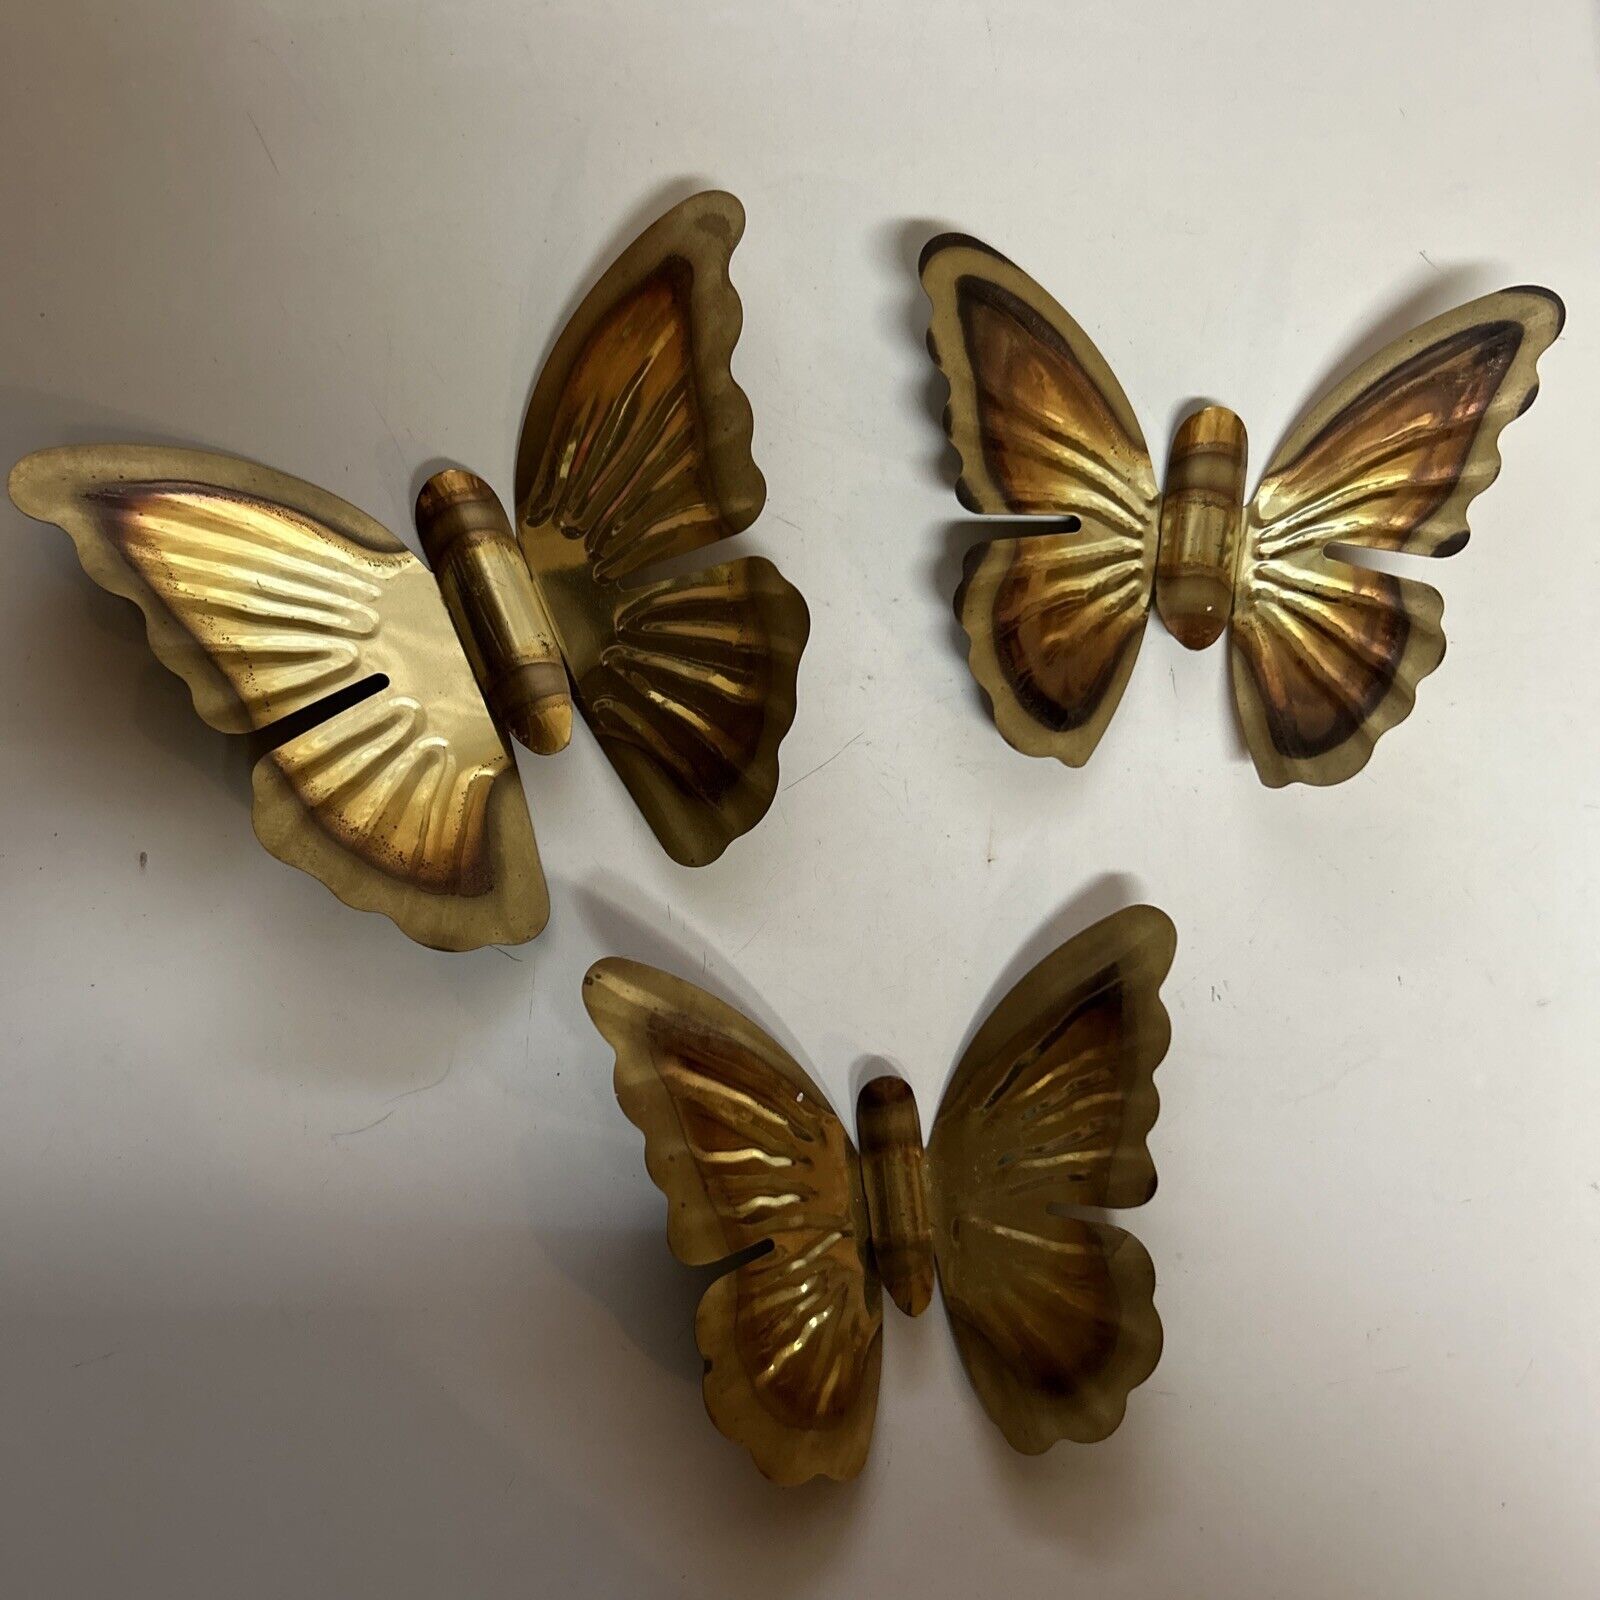 MCM Vintage Brass Metal Butterflies Wall Hanging Lot of 3 Ornate Home Decor